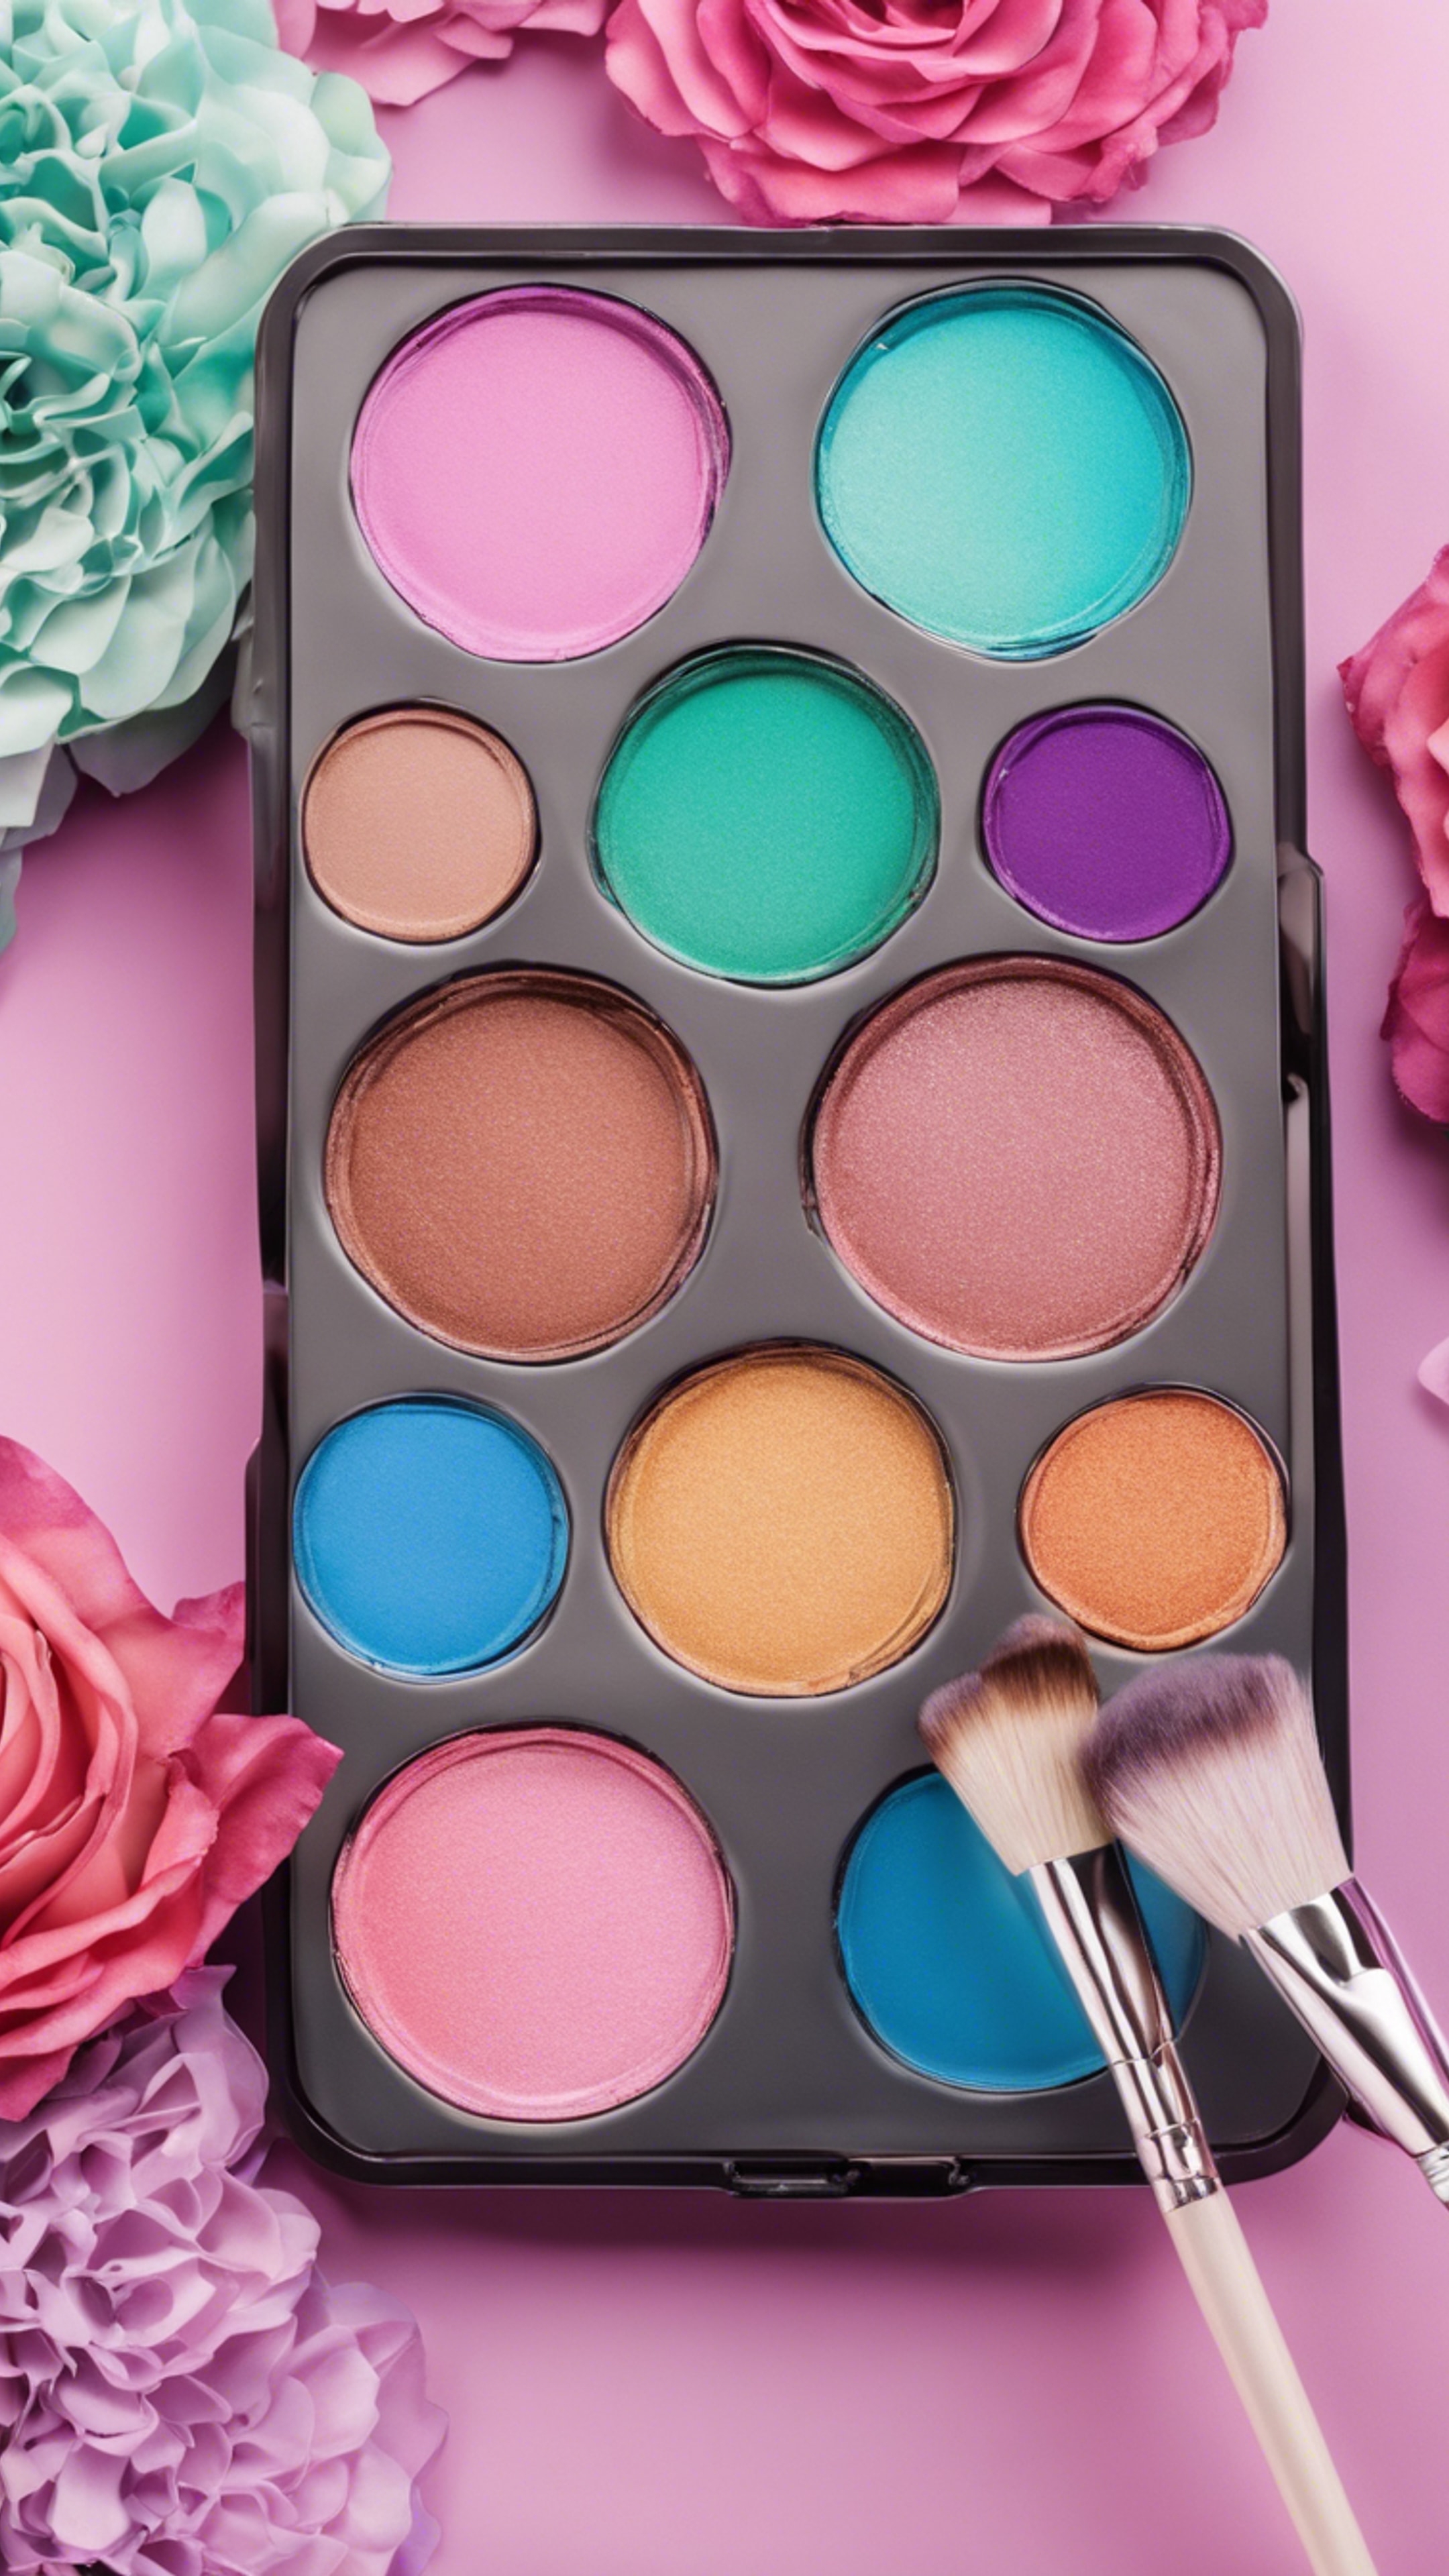 A cute girly makeup palette with a variety of vibrant colors and a brush for application. Тапет[6f3ccf3758d549978770]